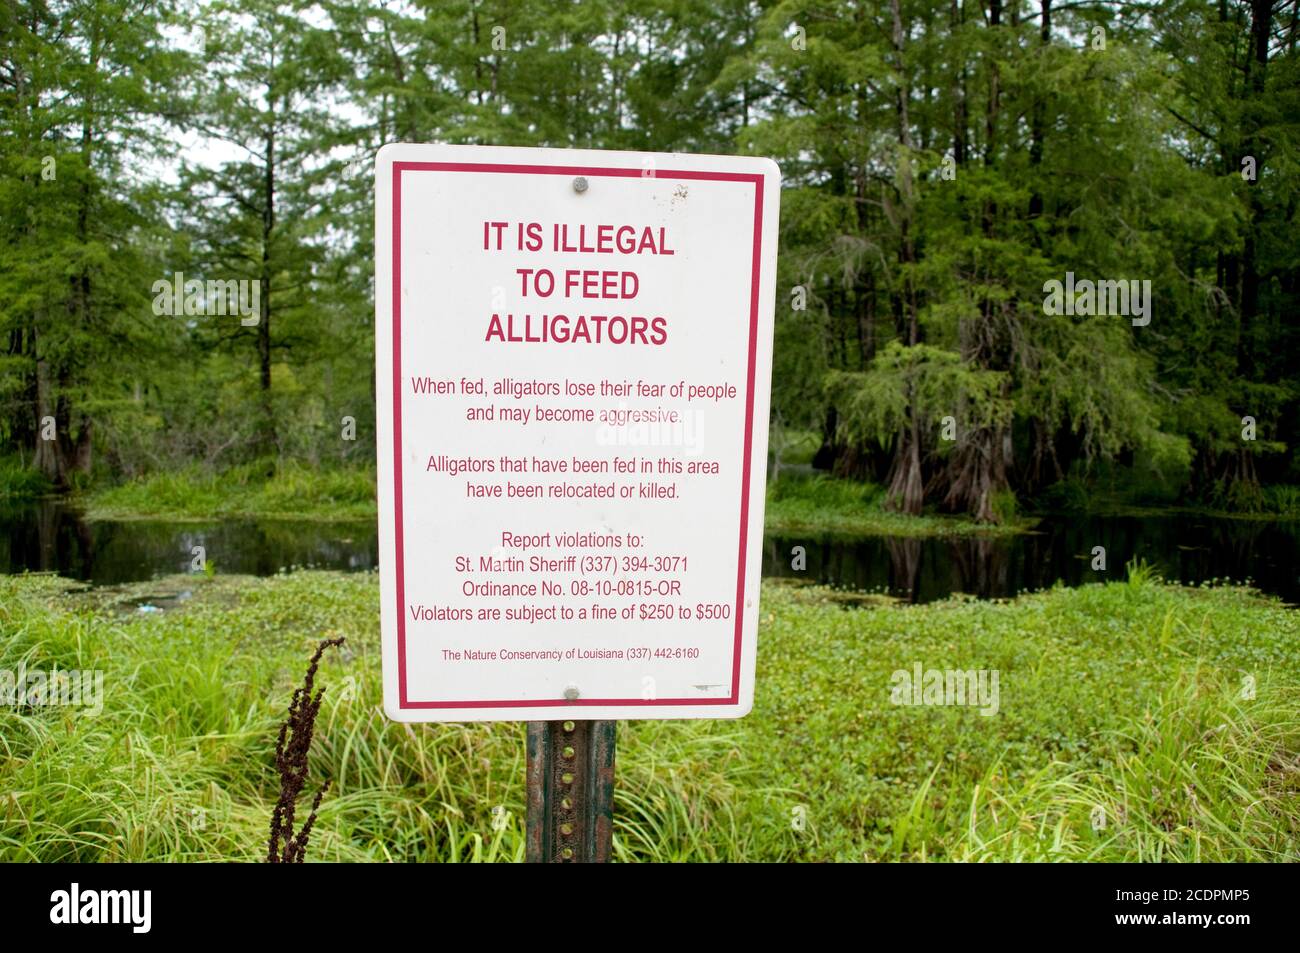 A 'Don't Feed the Alligators' sign in the Cypress Island Preserve, on the western edge of the Atchafalaya swamp, near Lafayette Louisiana. Stock Photo